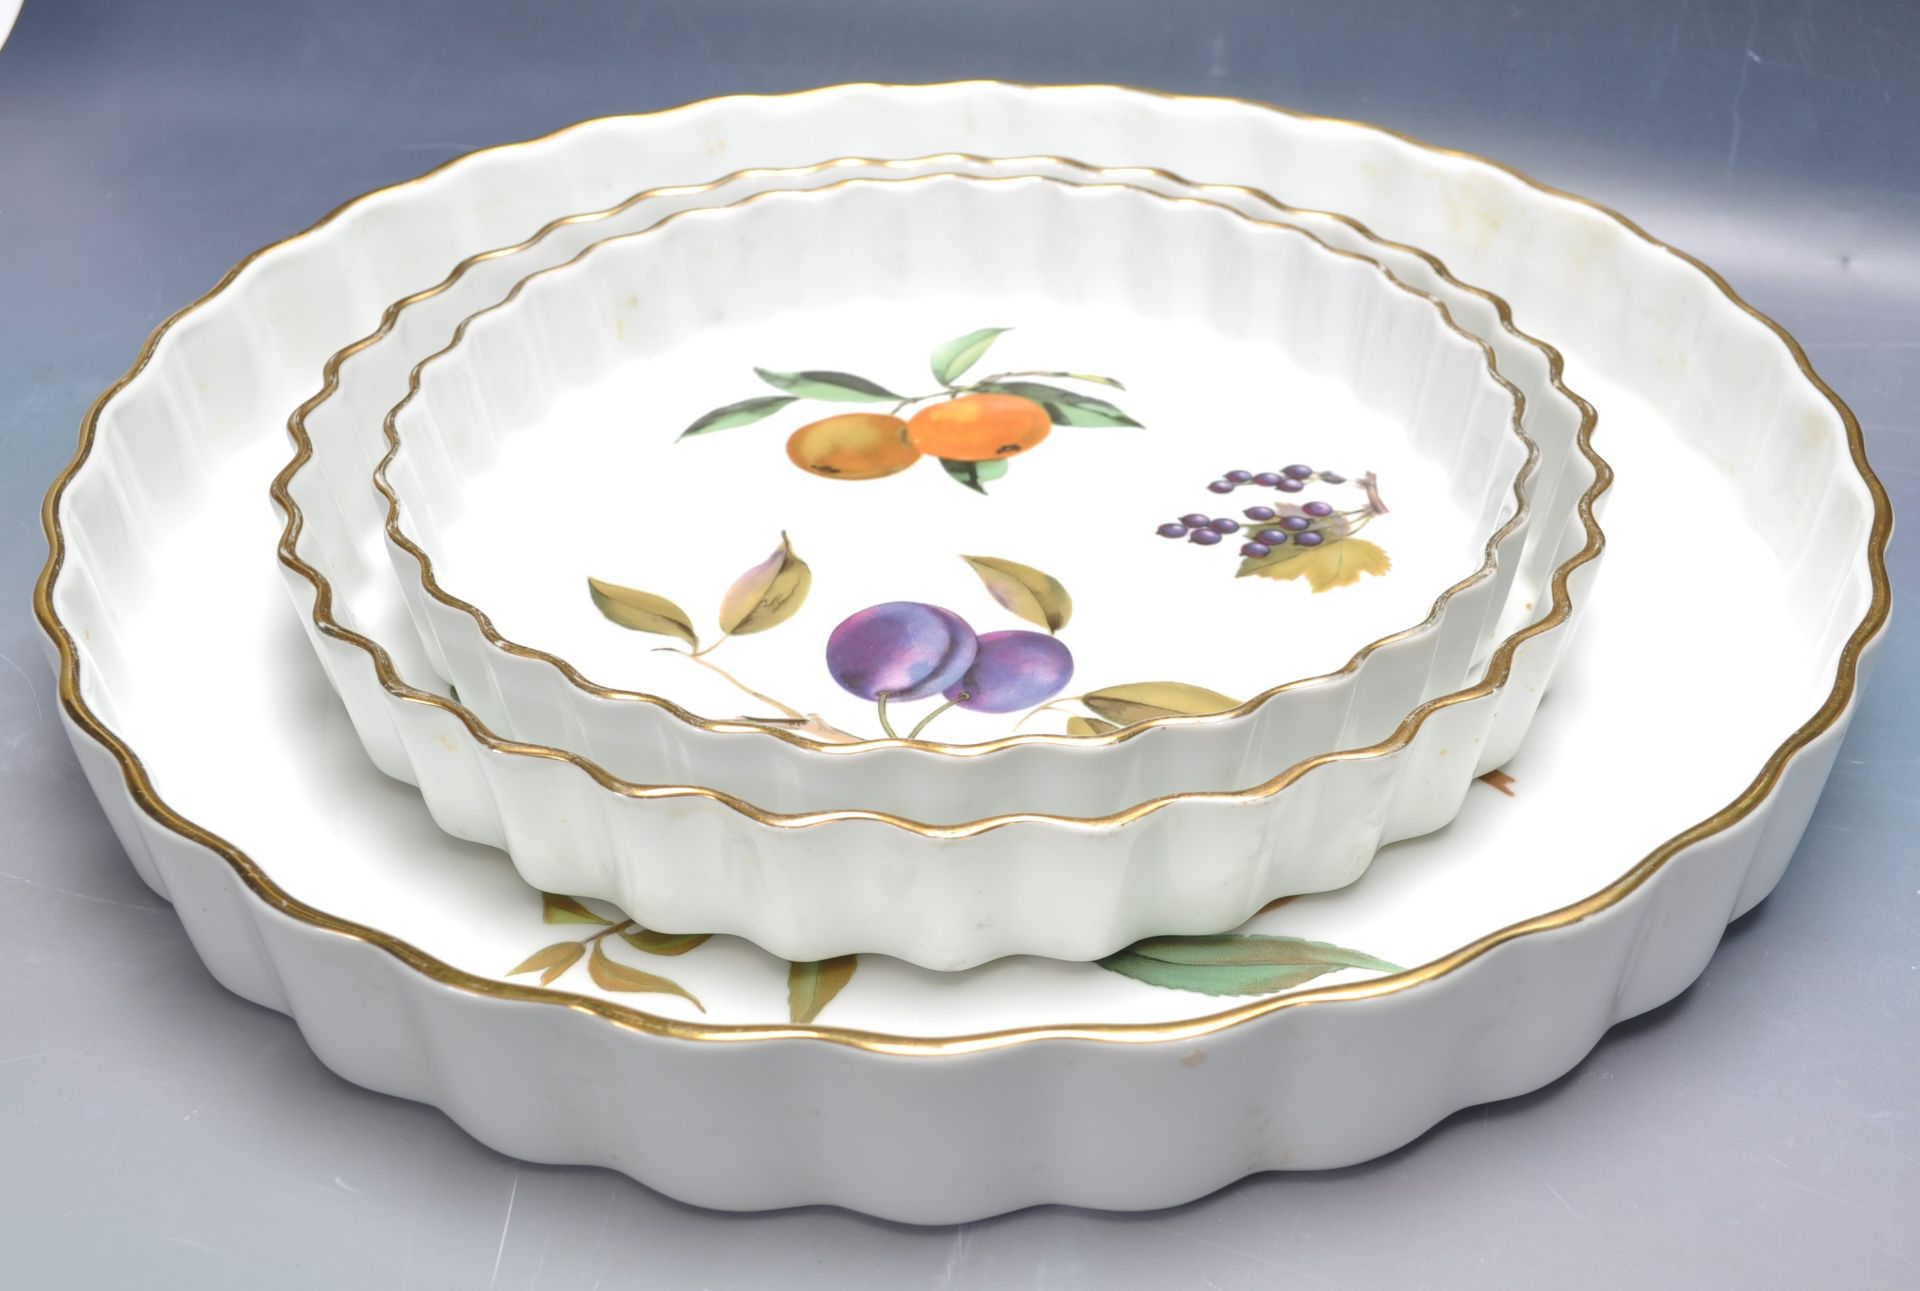 LARGE COLLECTION OF VINTAGE 20TH CENTURY ROYAL WORCESTER EVESHAM TABLEWARE - Image 11 of 16